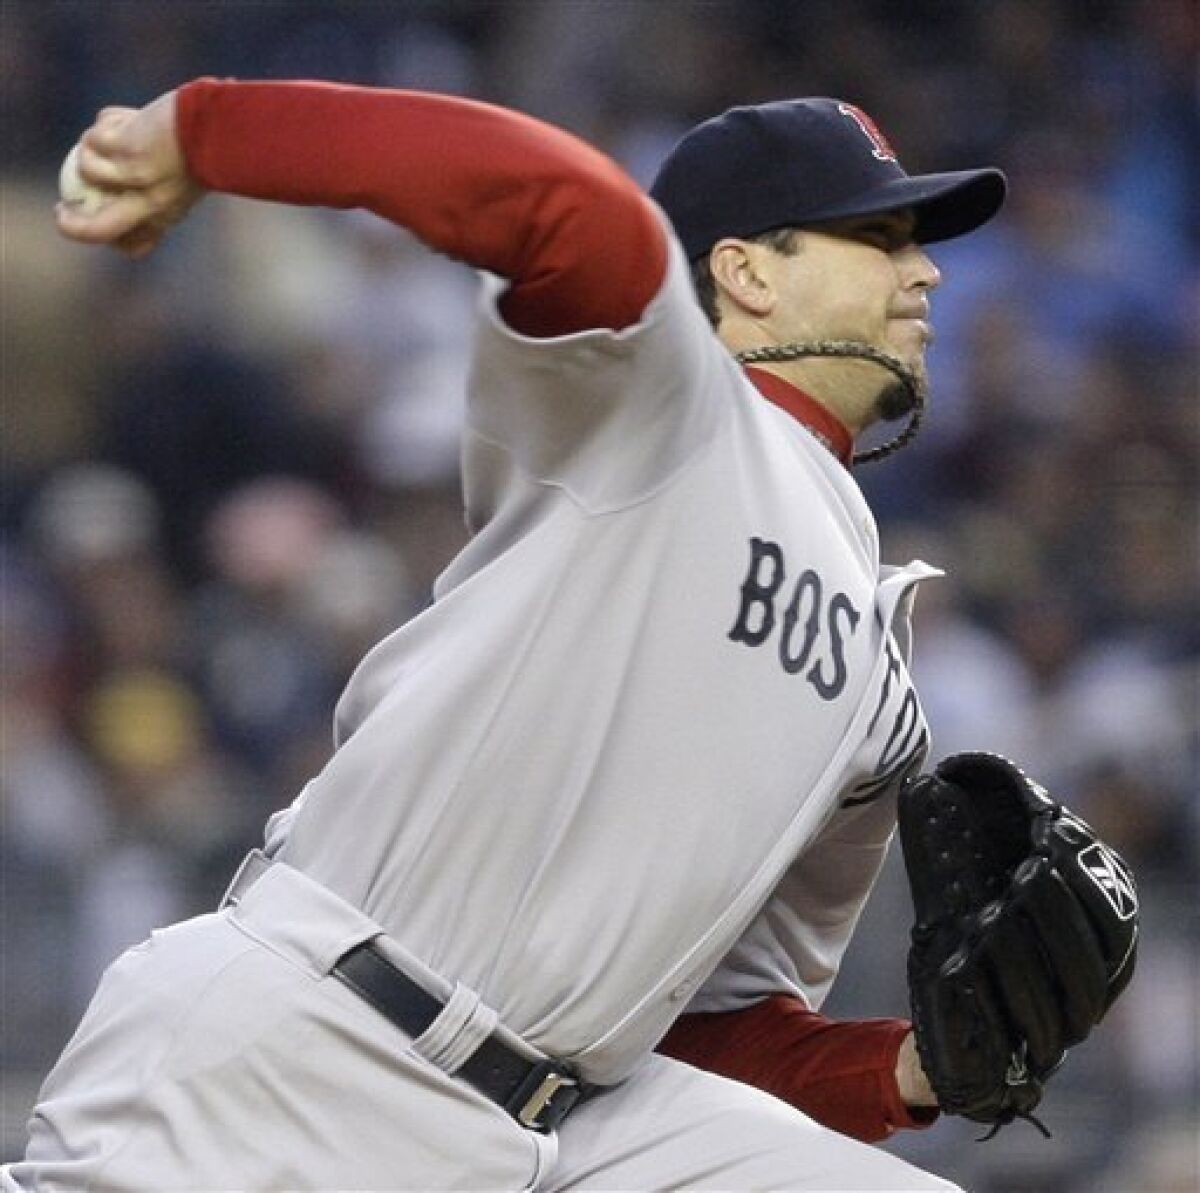 Boston Red Sox's Josh Beckett delivers against the New York Yankees in the first inning of a baseball game Tuesday, May 5, 2009, at Yankee Stadium in New York. (AP Photo/Julie Jacobson)